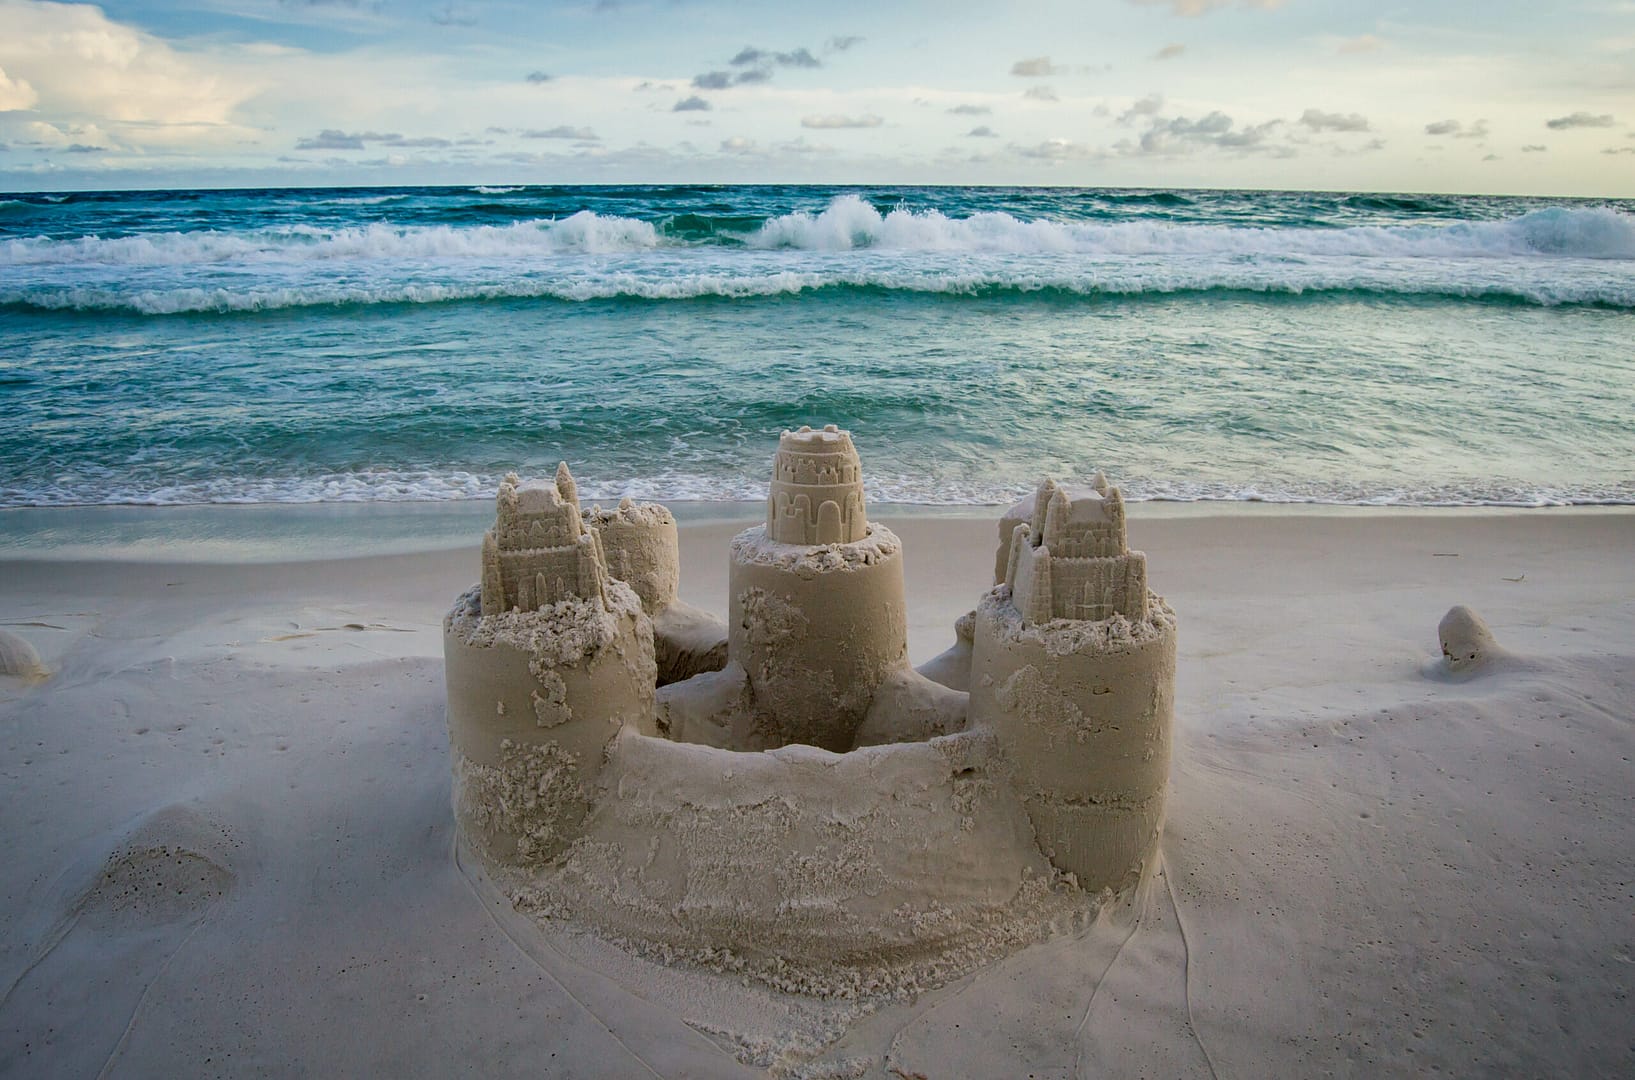 Impressive sand castles with towers on the beach